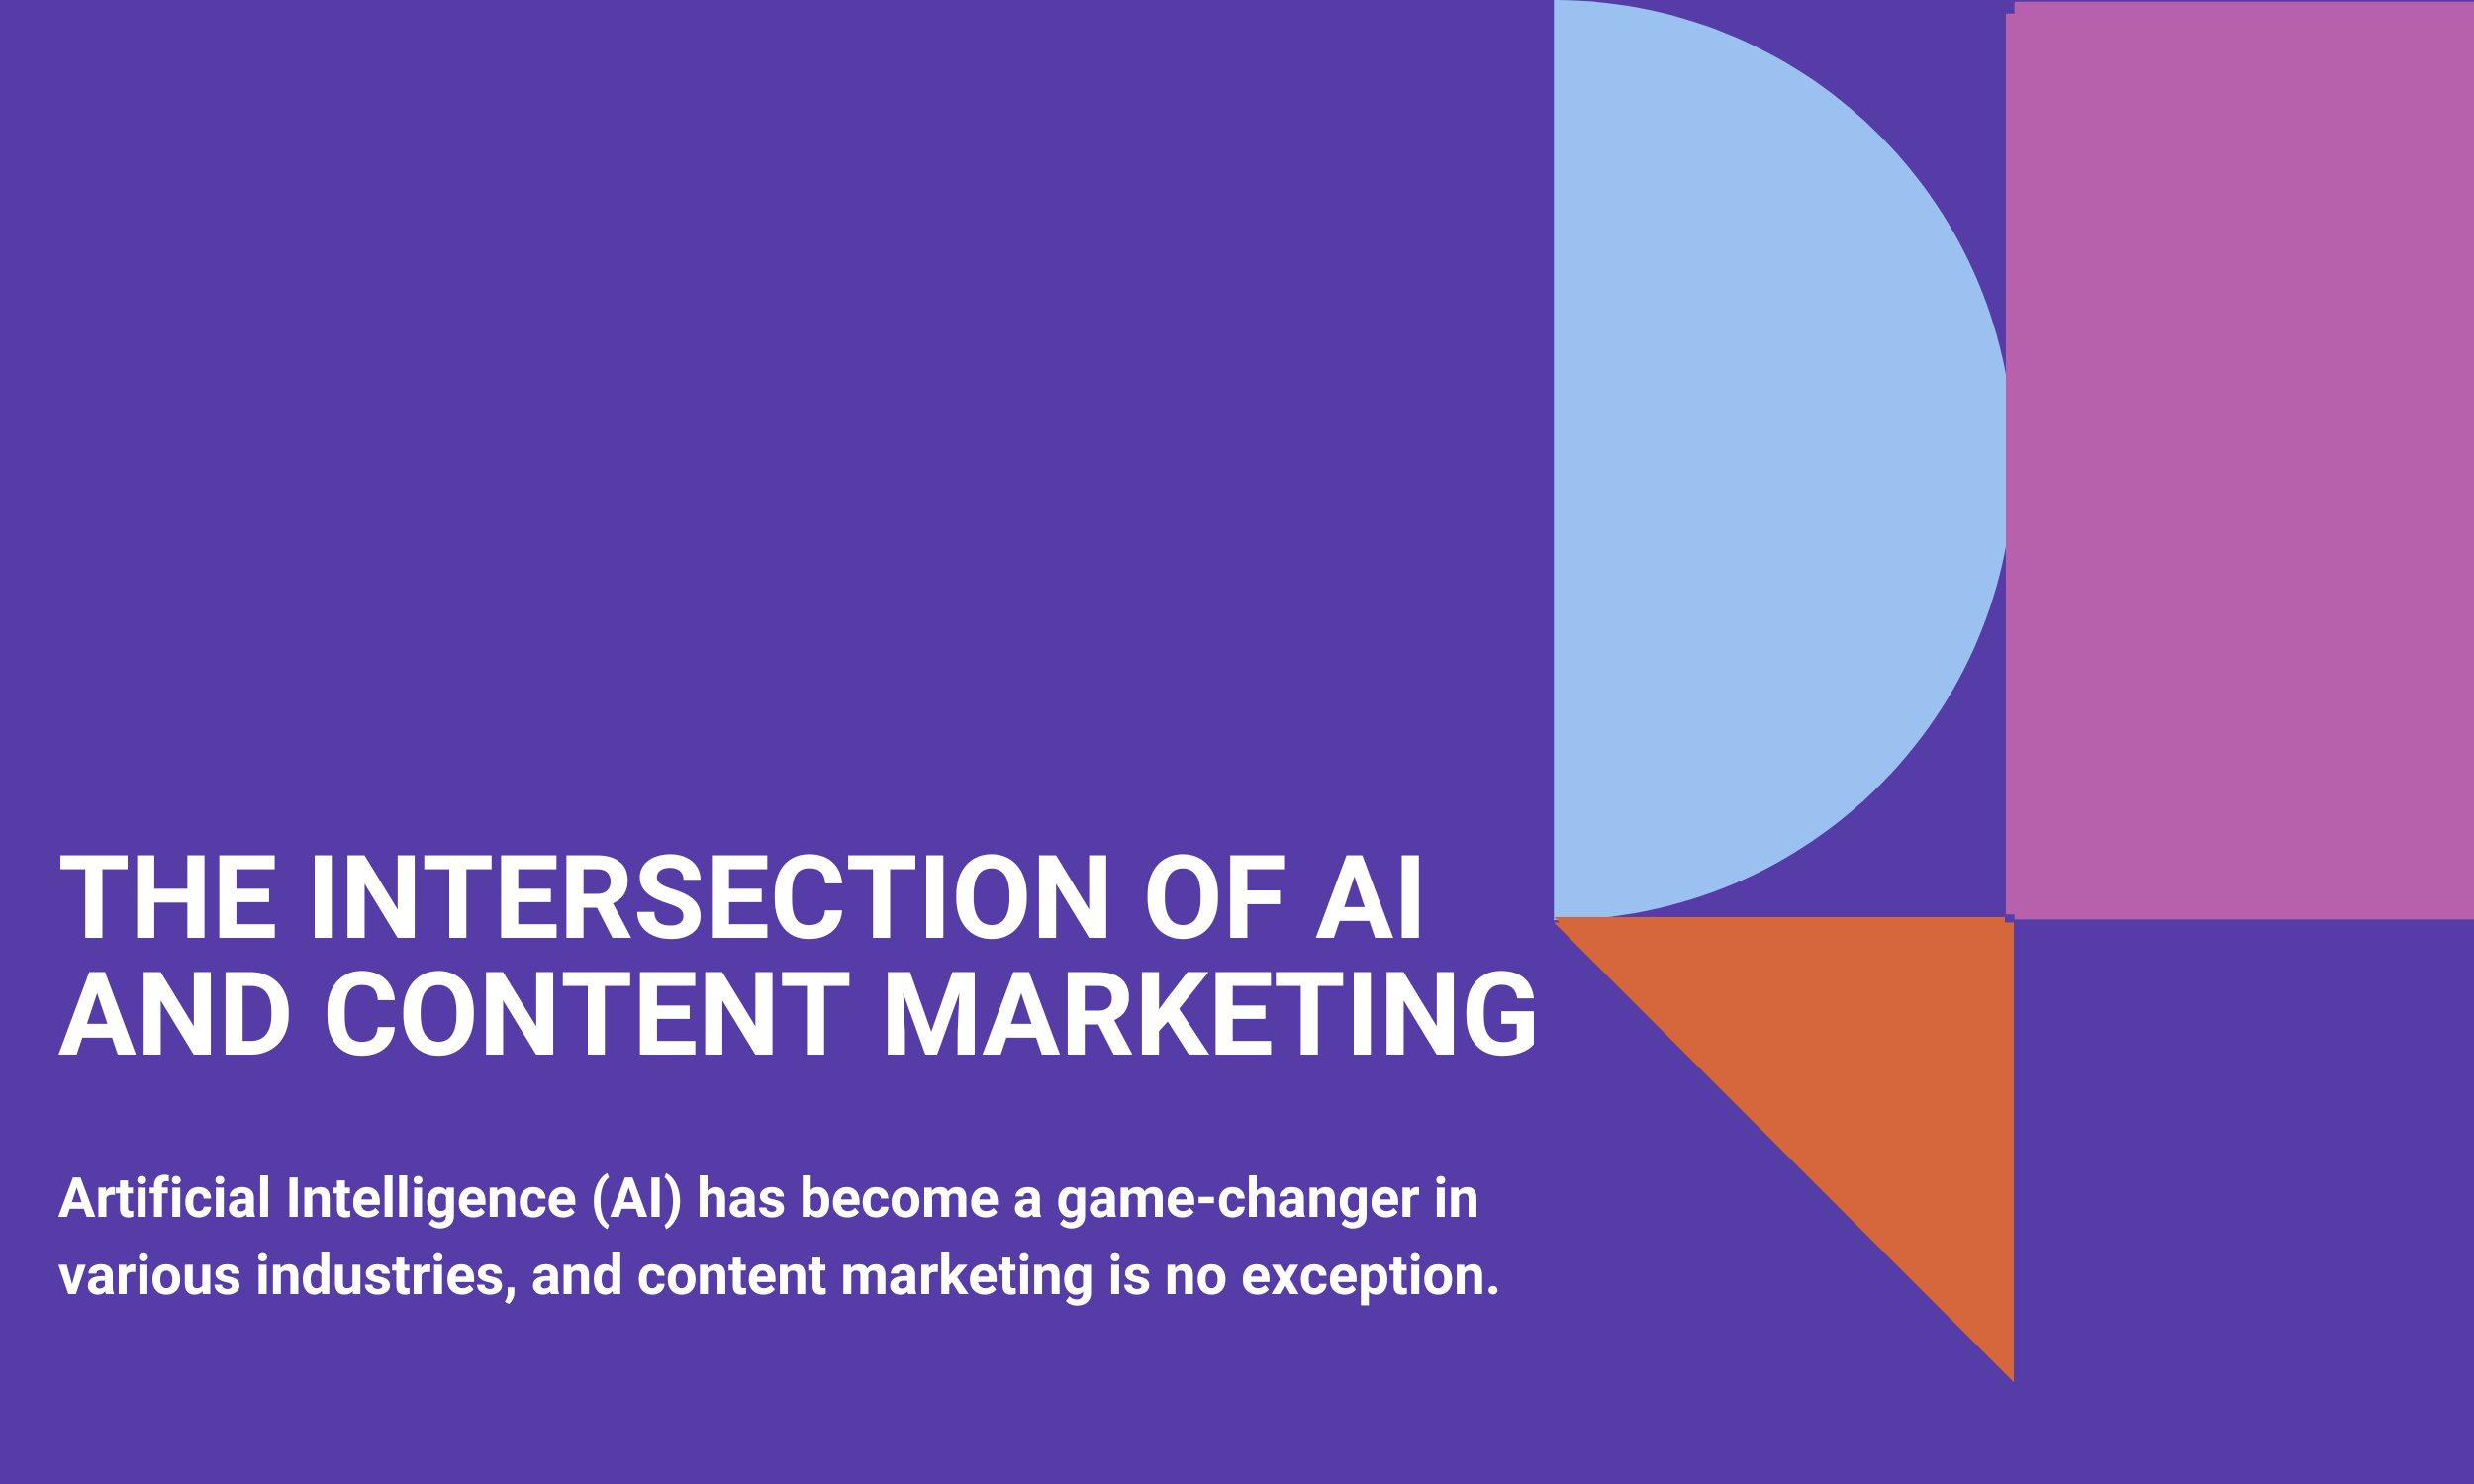 The Intersection of AI and Content Marketing